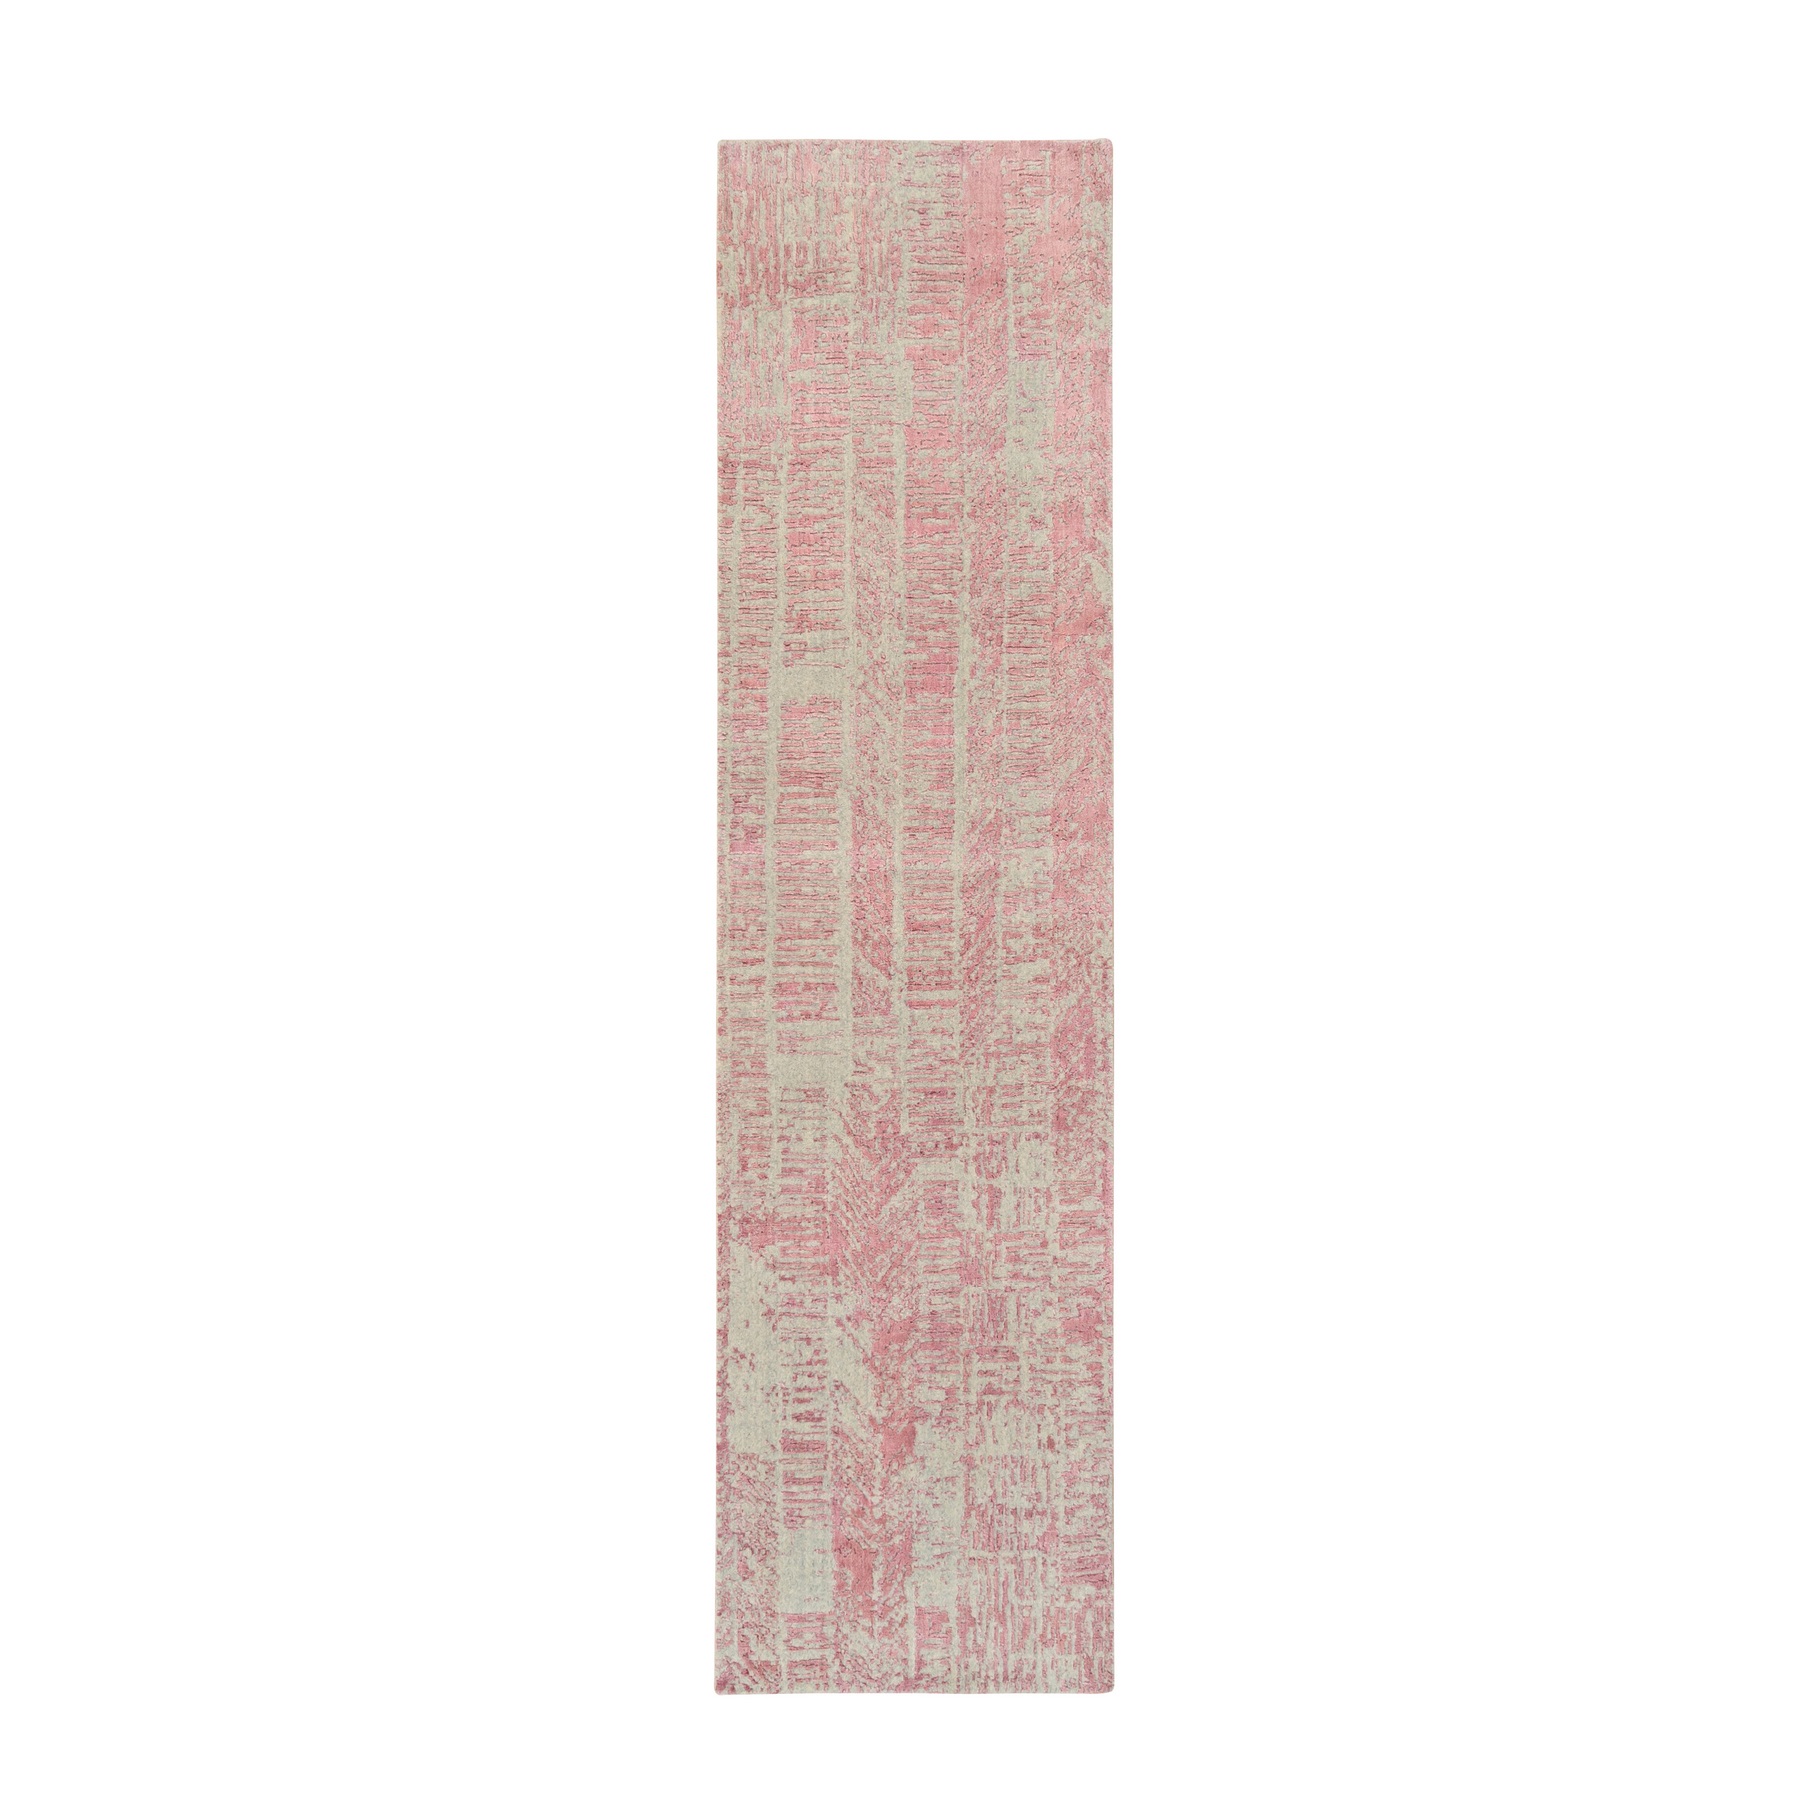 2'6"x10' Rose Pink, All Over Design Wool and Art Silk, Jacquard Hand Loomed, Runner Oriental Rug 